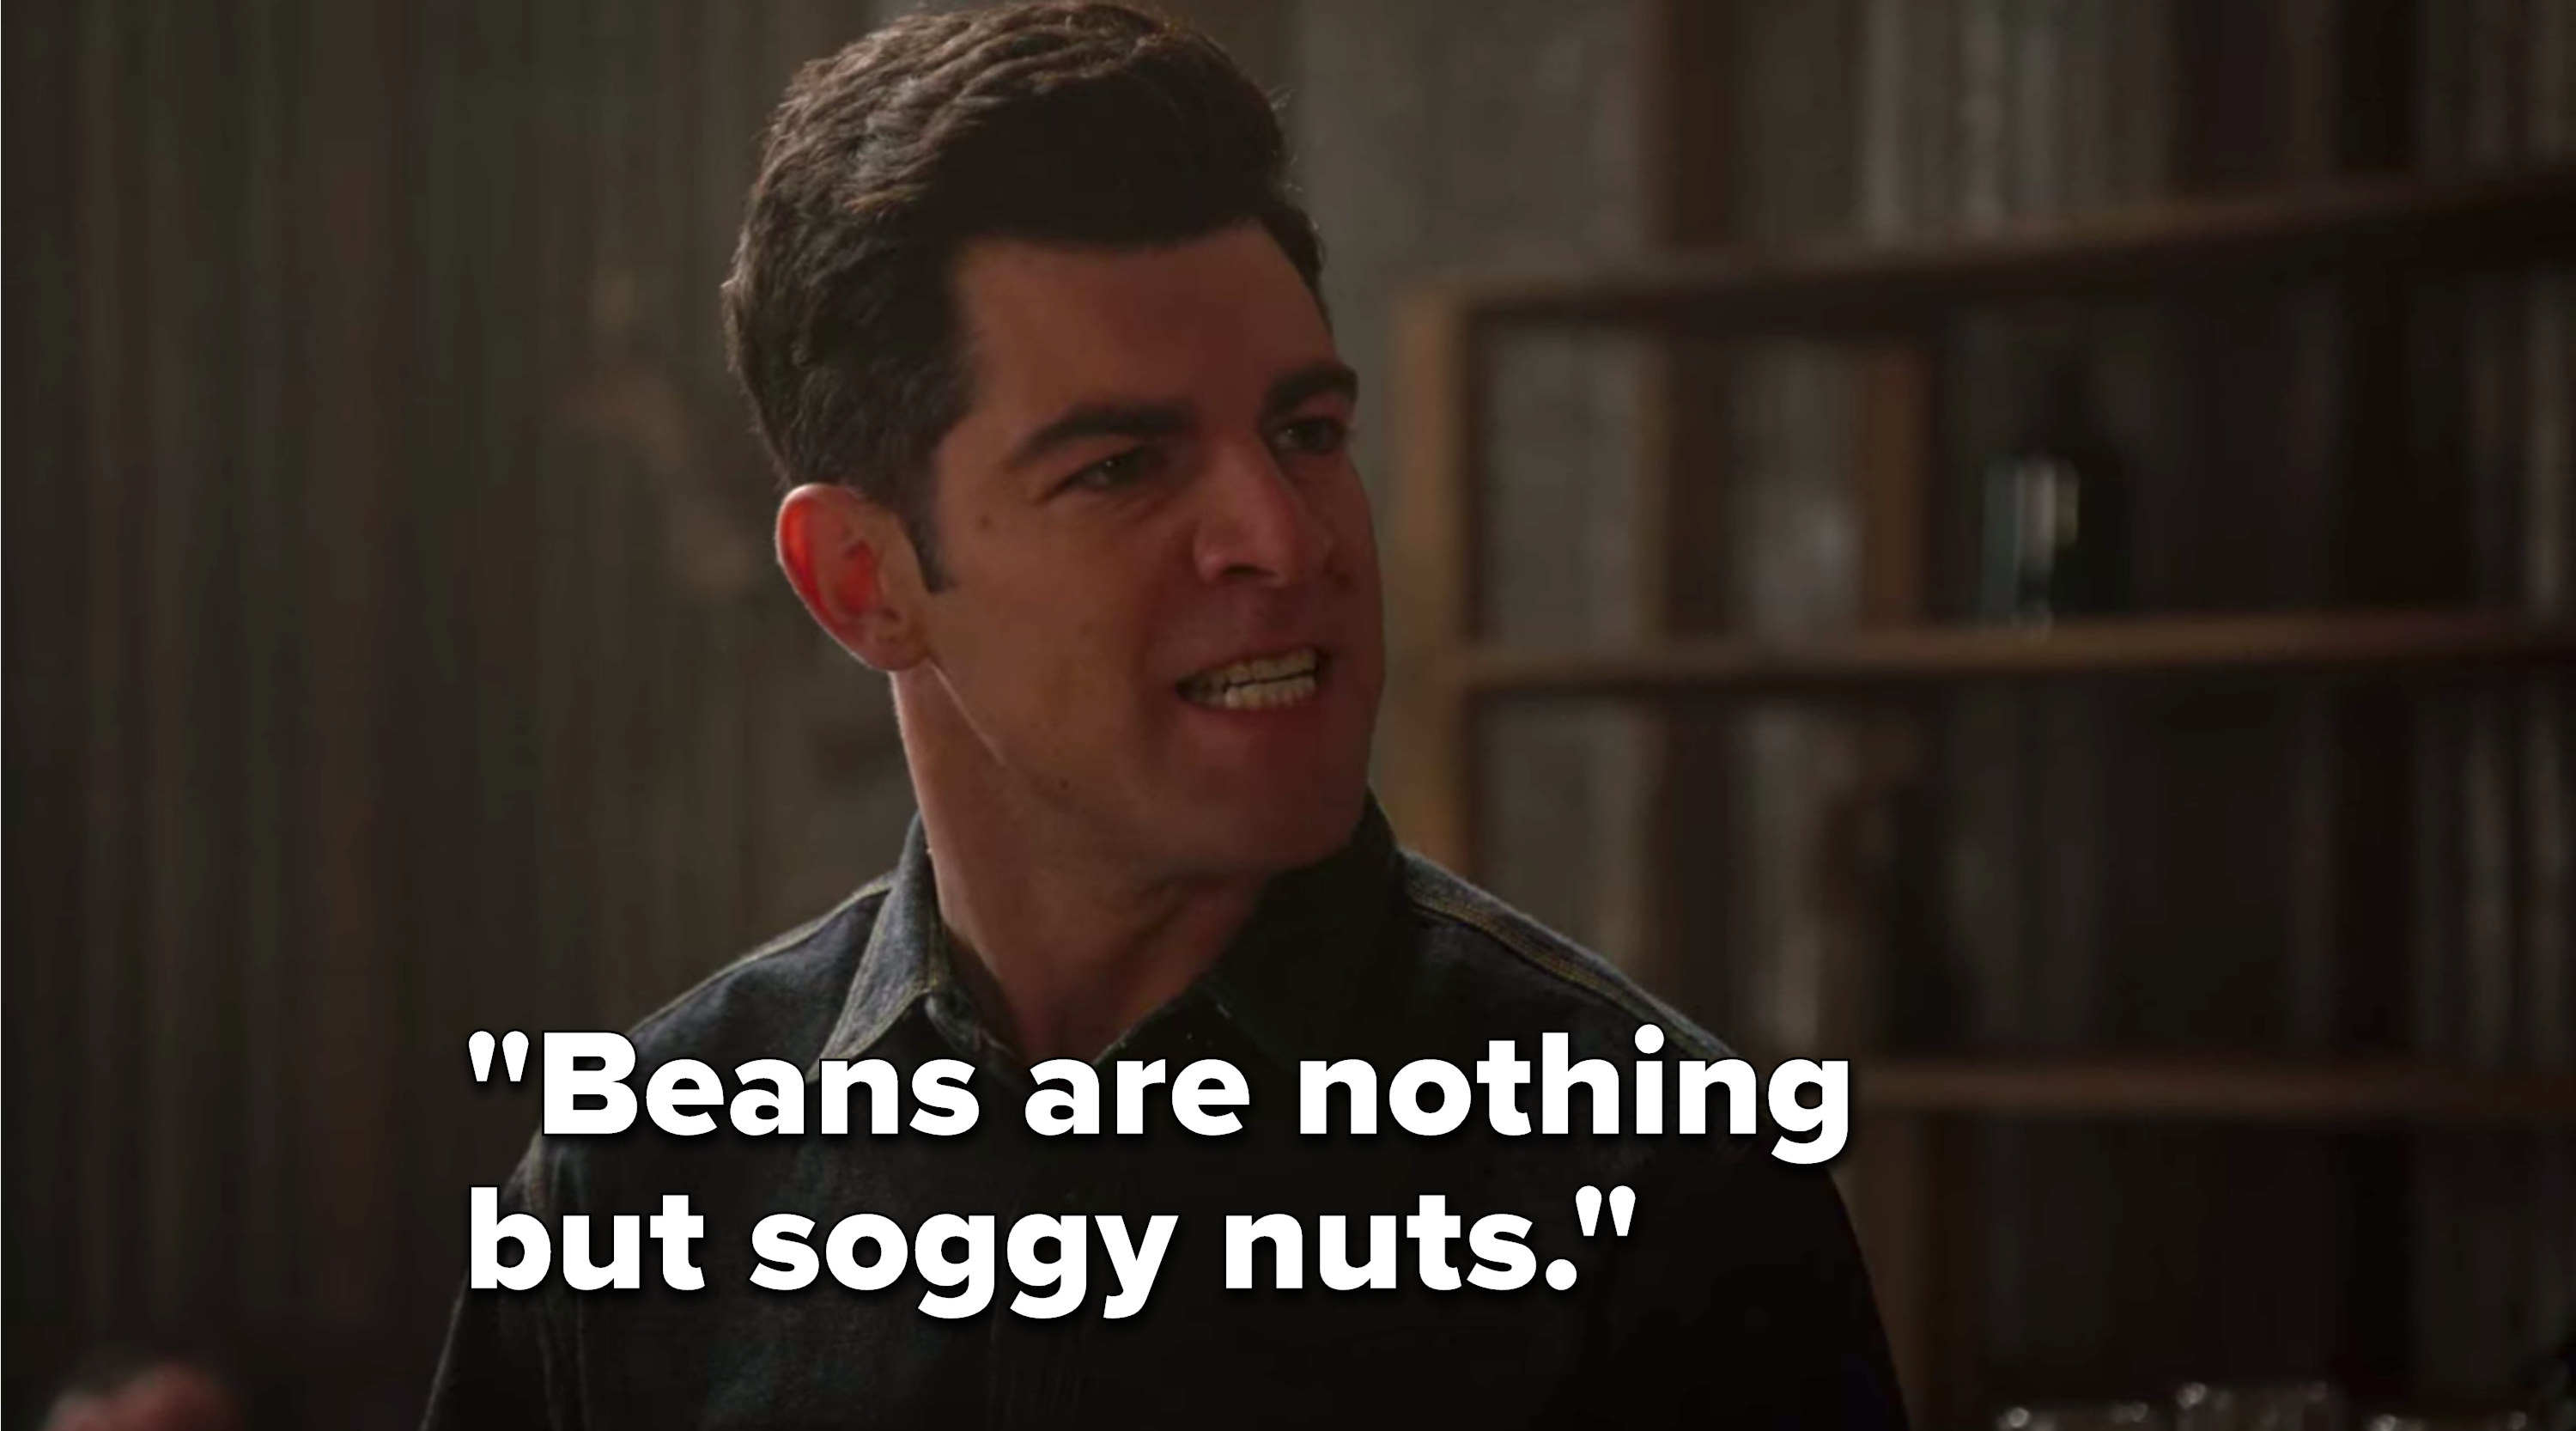 Schmidt says, &quot;Beans are nothing but soggy nuts&quot;